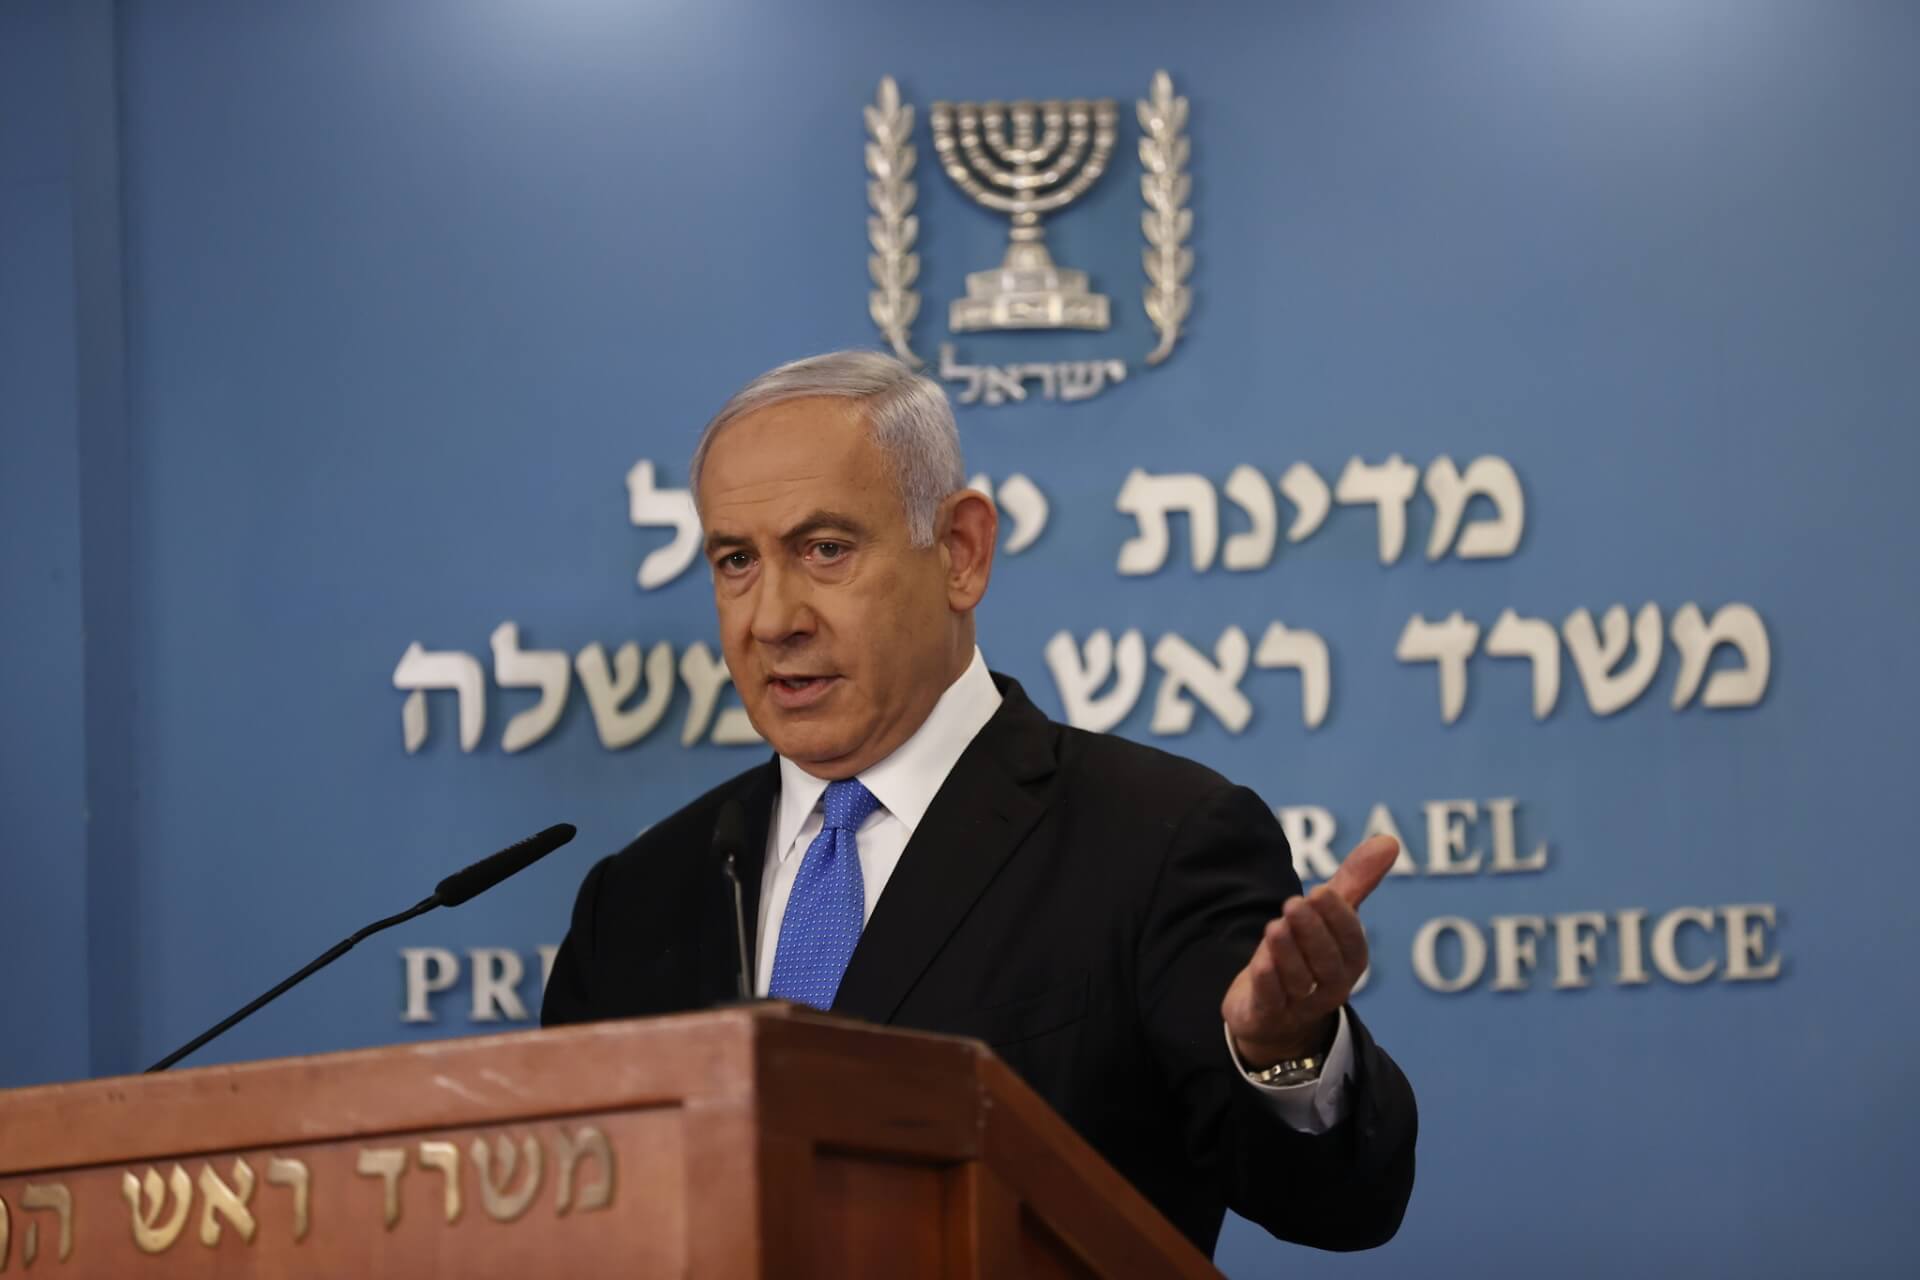 Netanyahu Proposes Direct PM Election As Likud Unlikely to Form Government